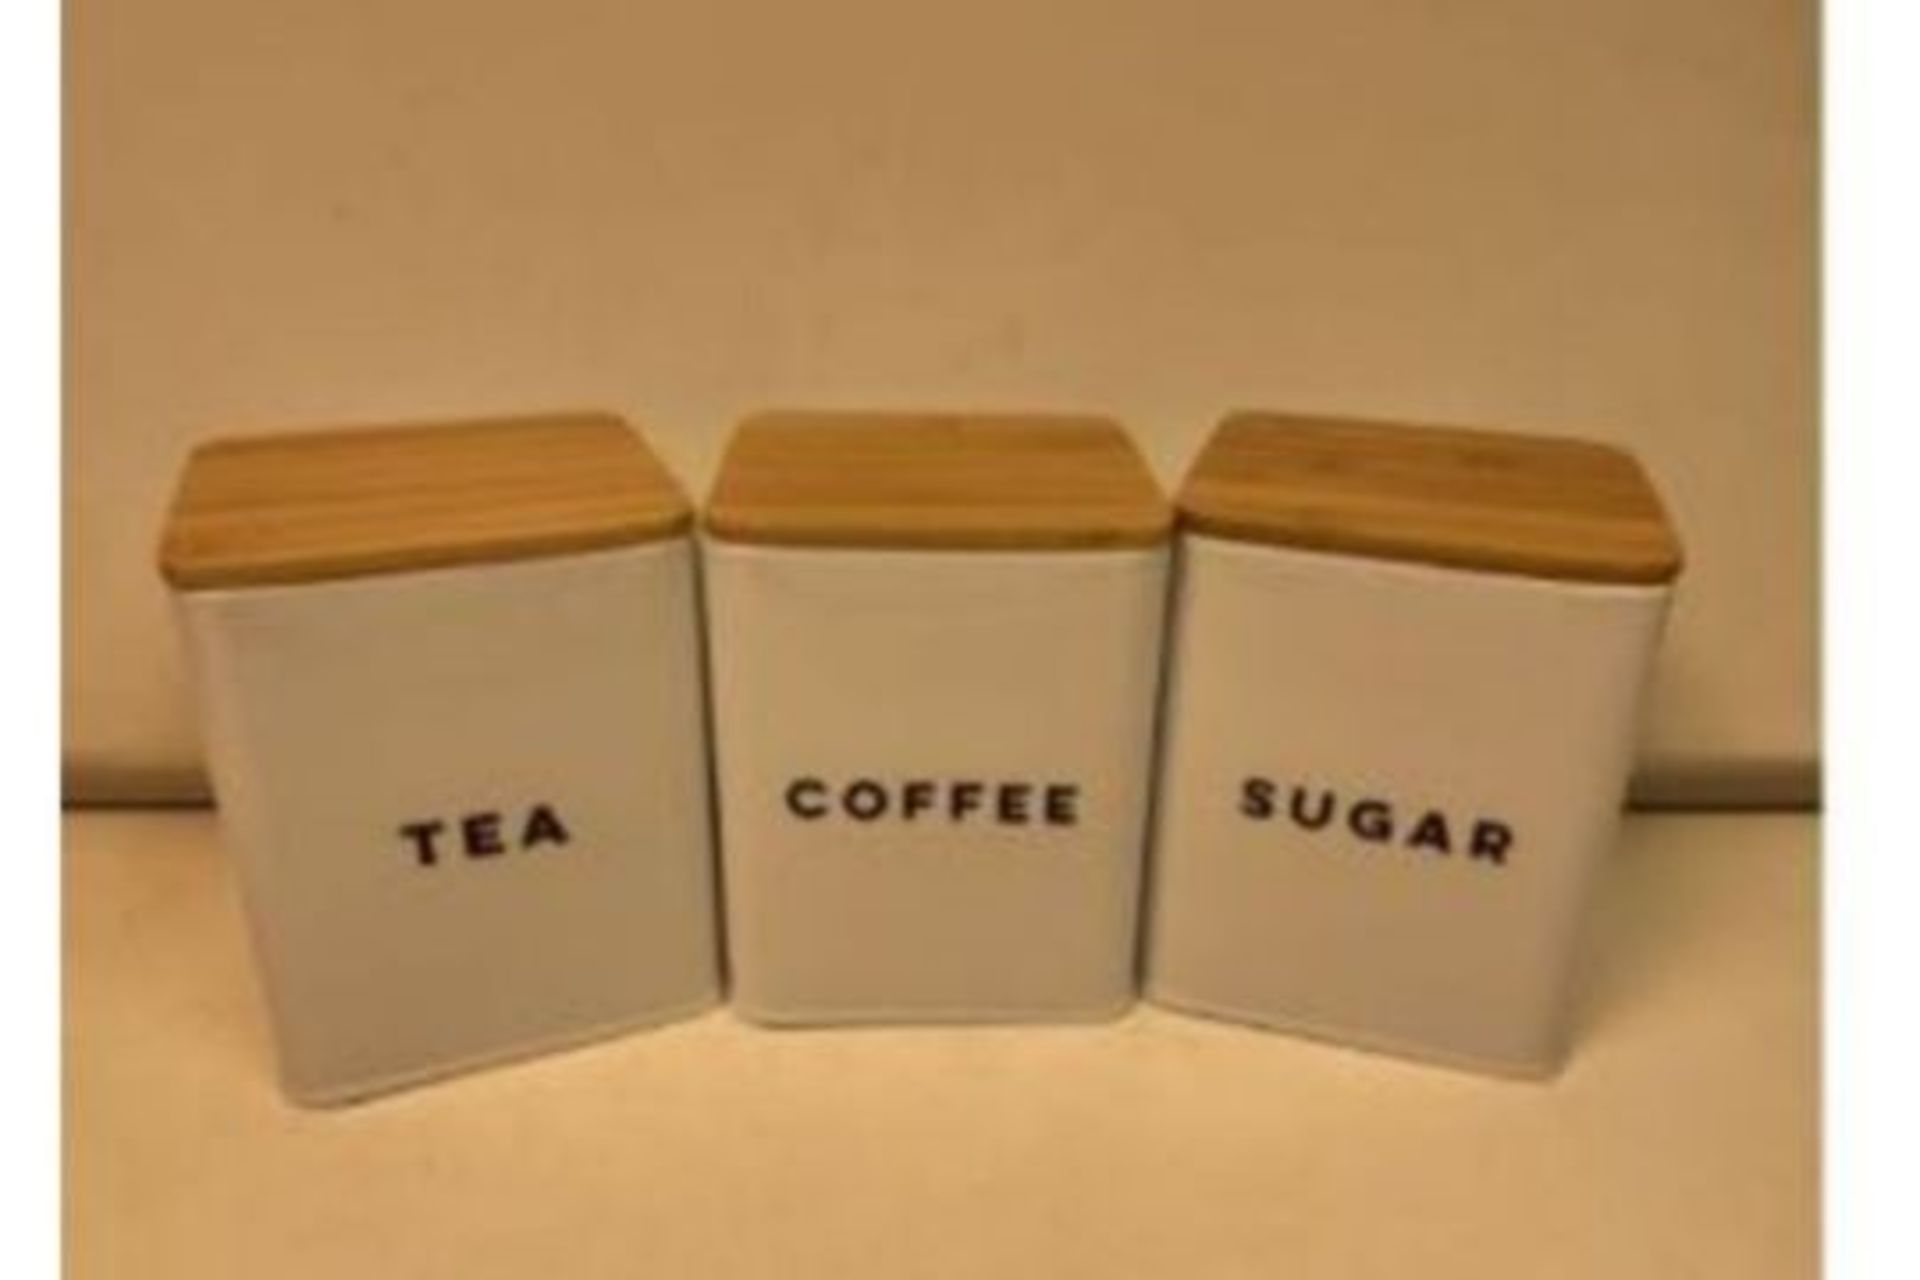 12 x NEW BOXED SETS OF 3 - TEA, COFFEE & SUGAR SETS - WHITE WITH BAMBOO AIRTIGHT LIDS (ROW19)